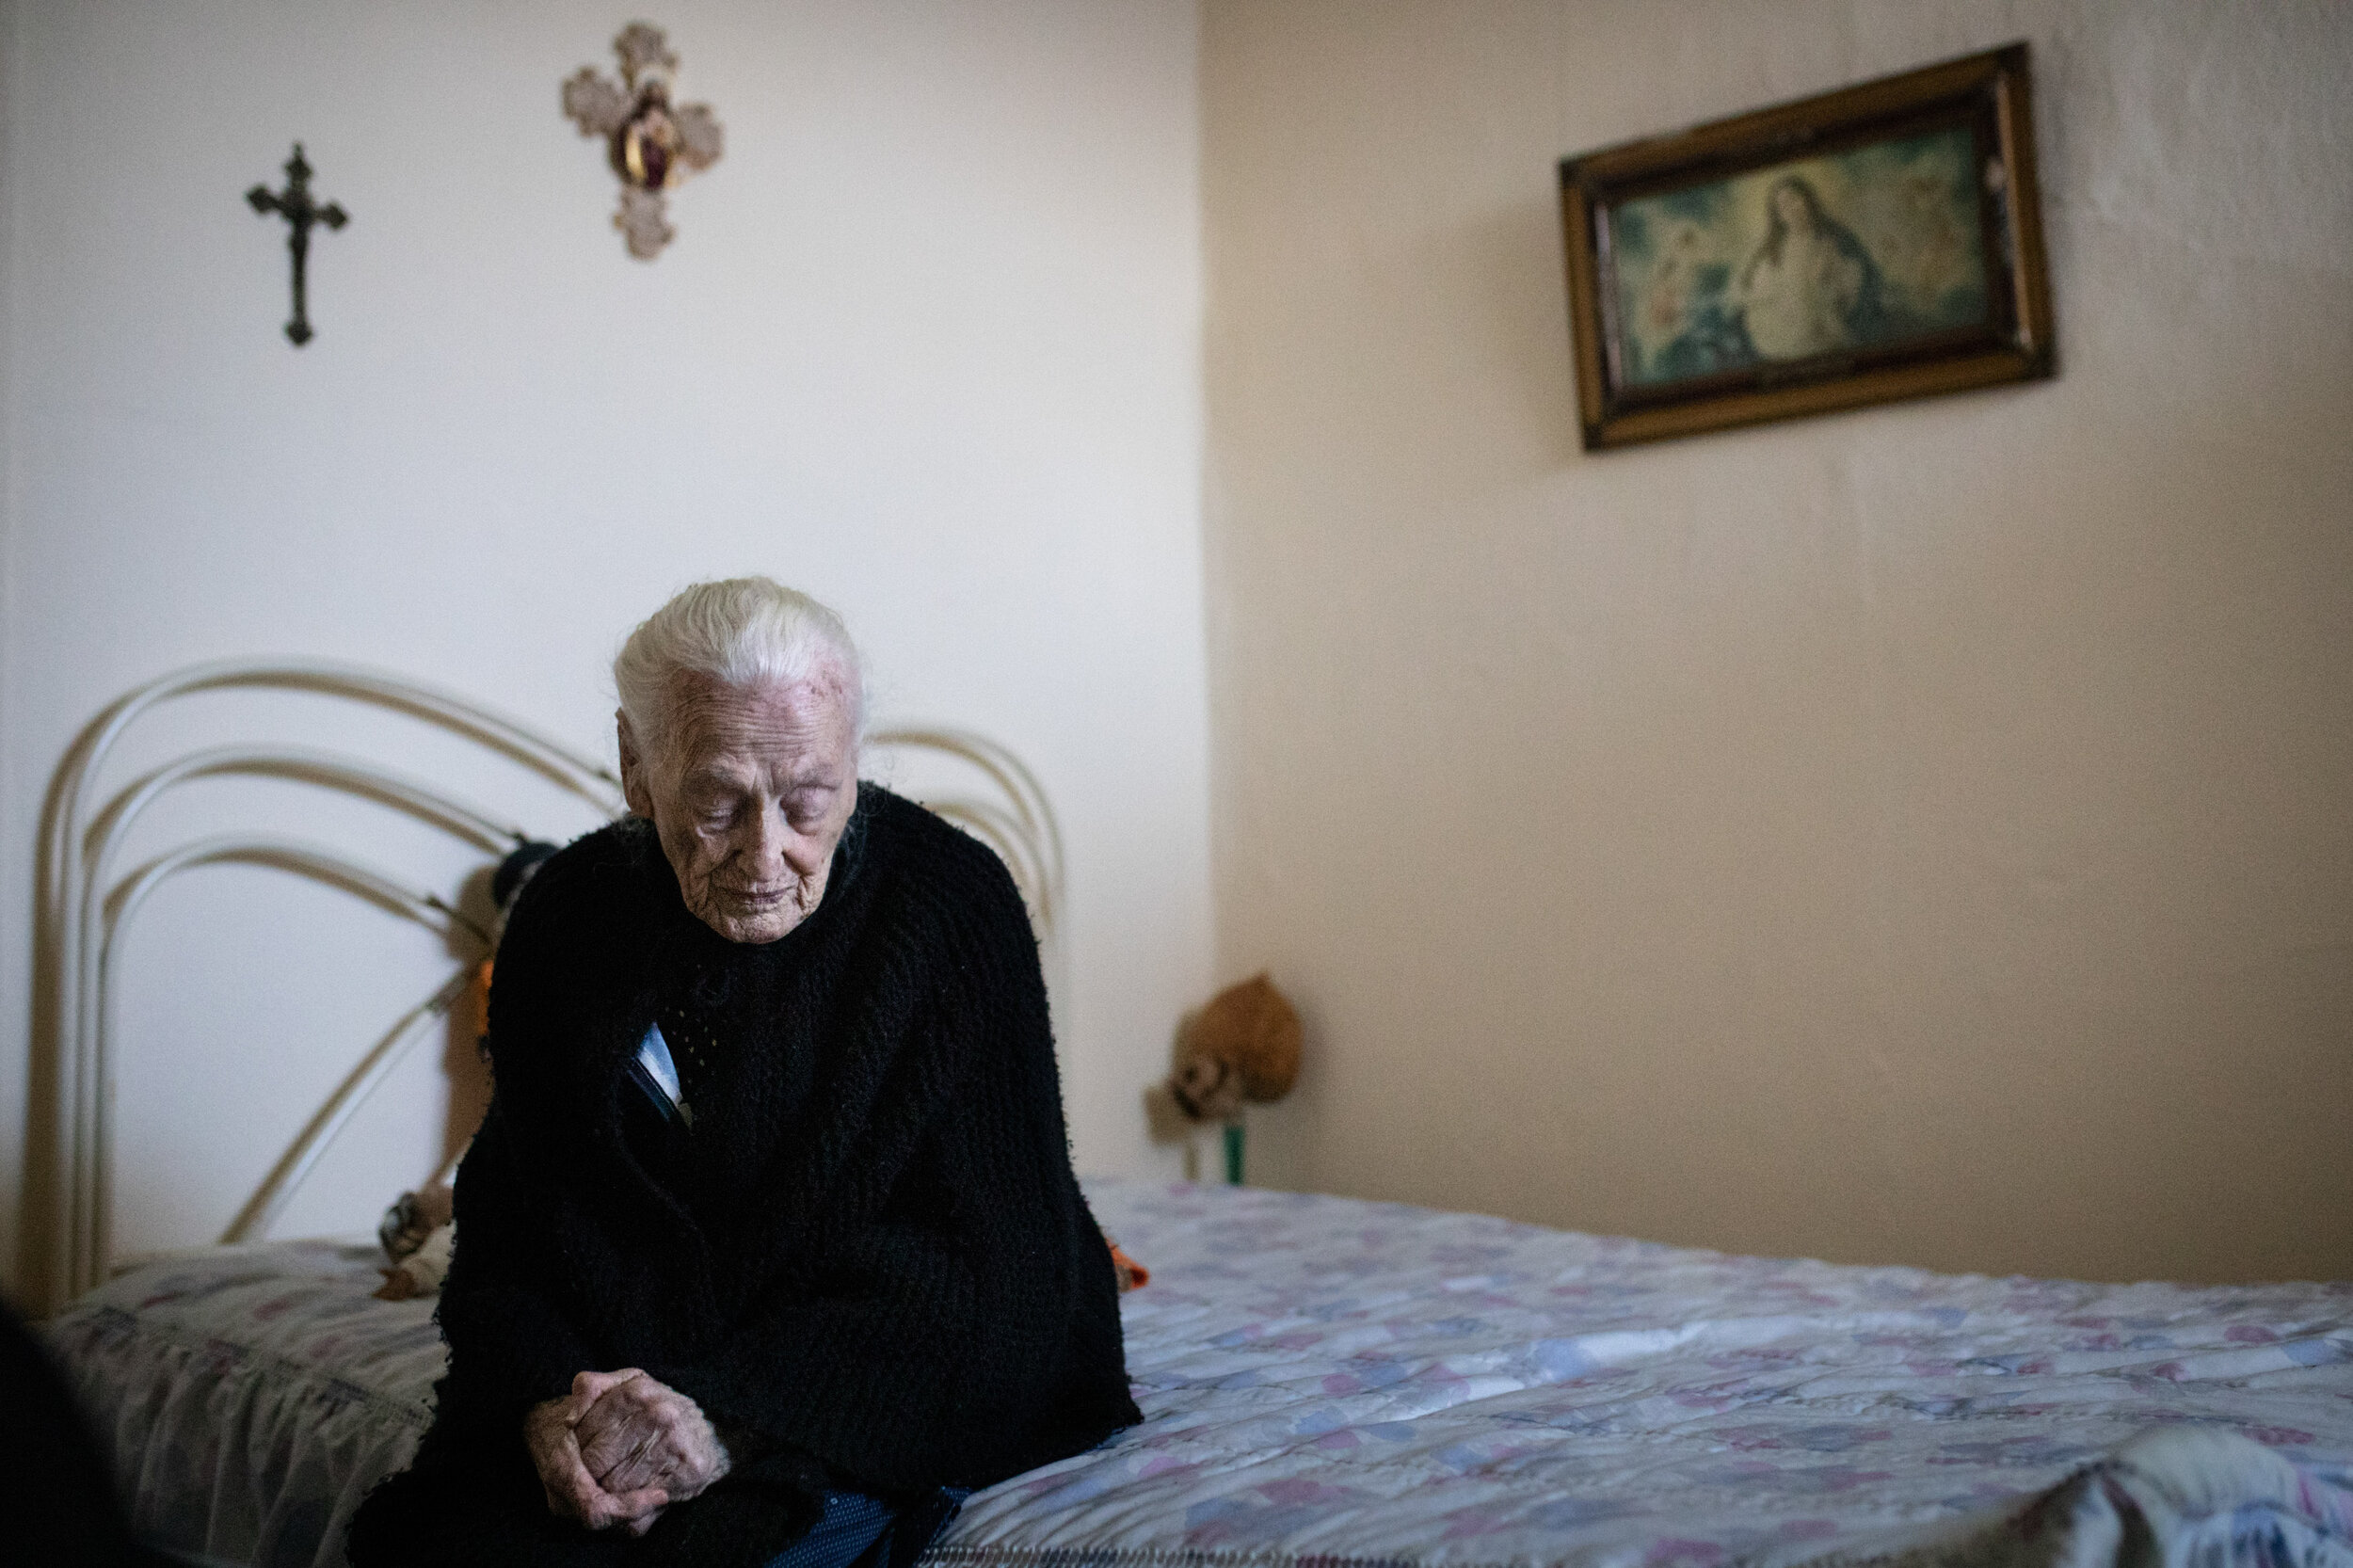  Emilia Raposo, 94 poses for a portrait in her bedroom in the Santos Lima building. “I was born here and I raised three boys in this small apartment, this is all I know. If I am evicted, how will I survive on my own in another place?” asks Emília, a 